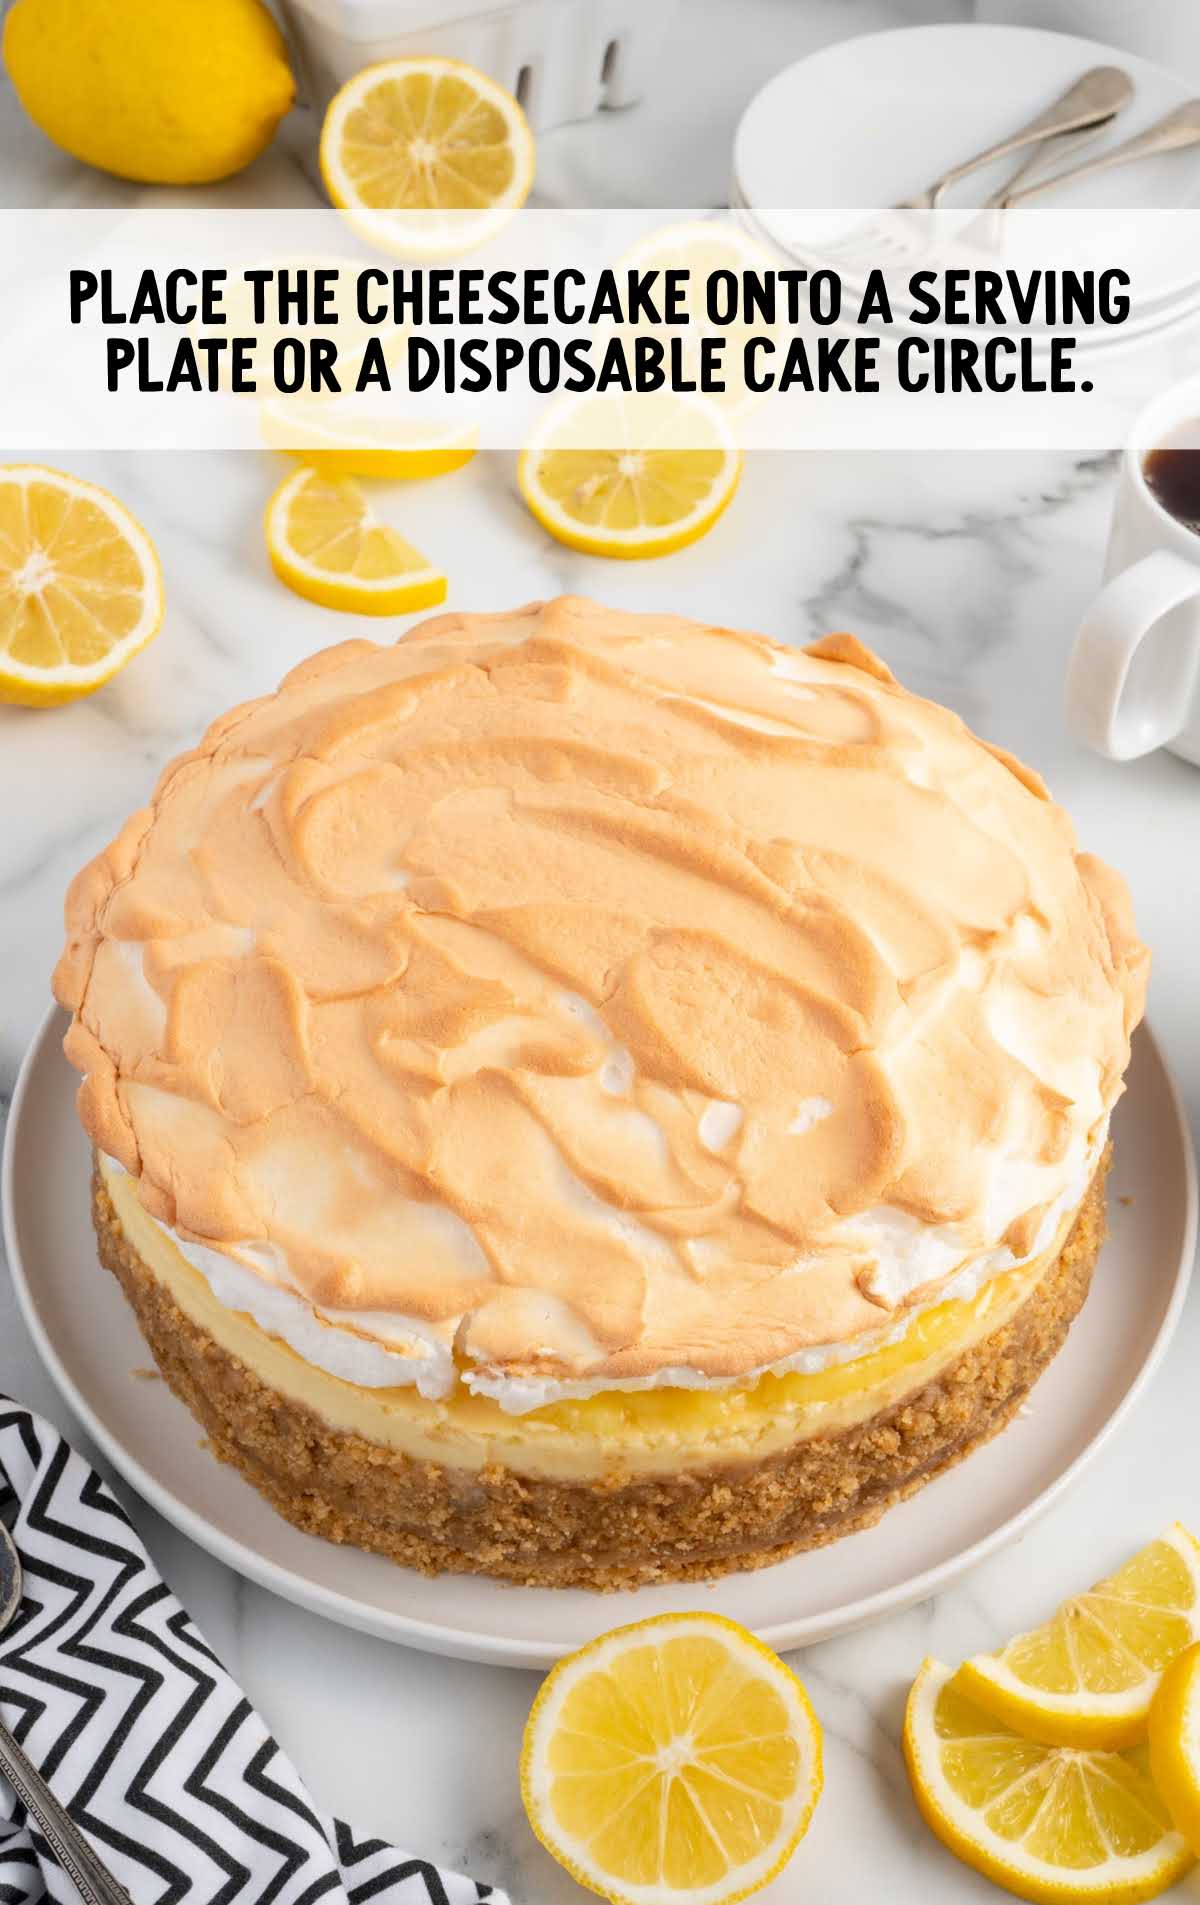 cheesecake placed on a plate or disposable cake circle